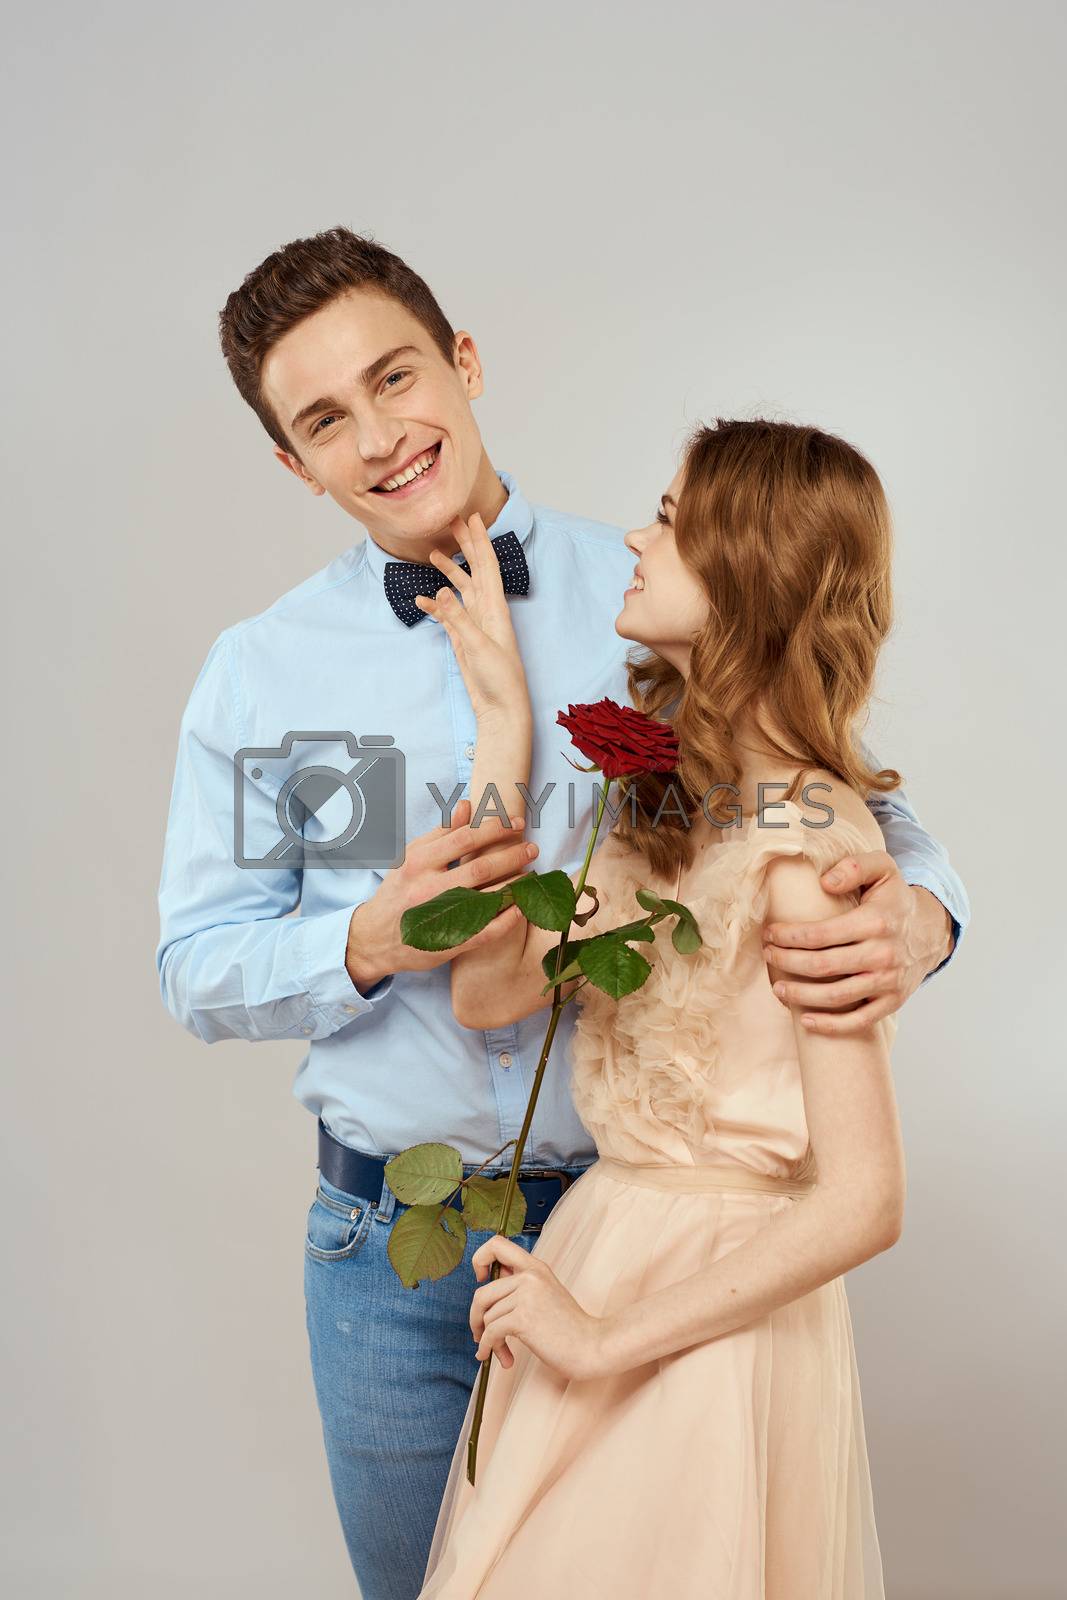 Young couple romance hug relationship dating red rose light studio background. High quality photo